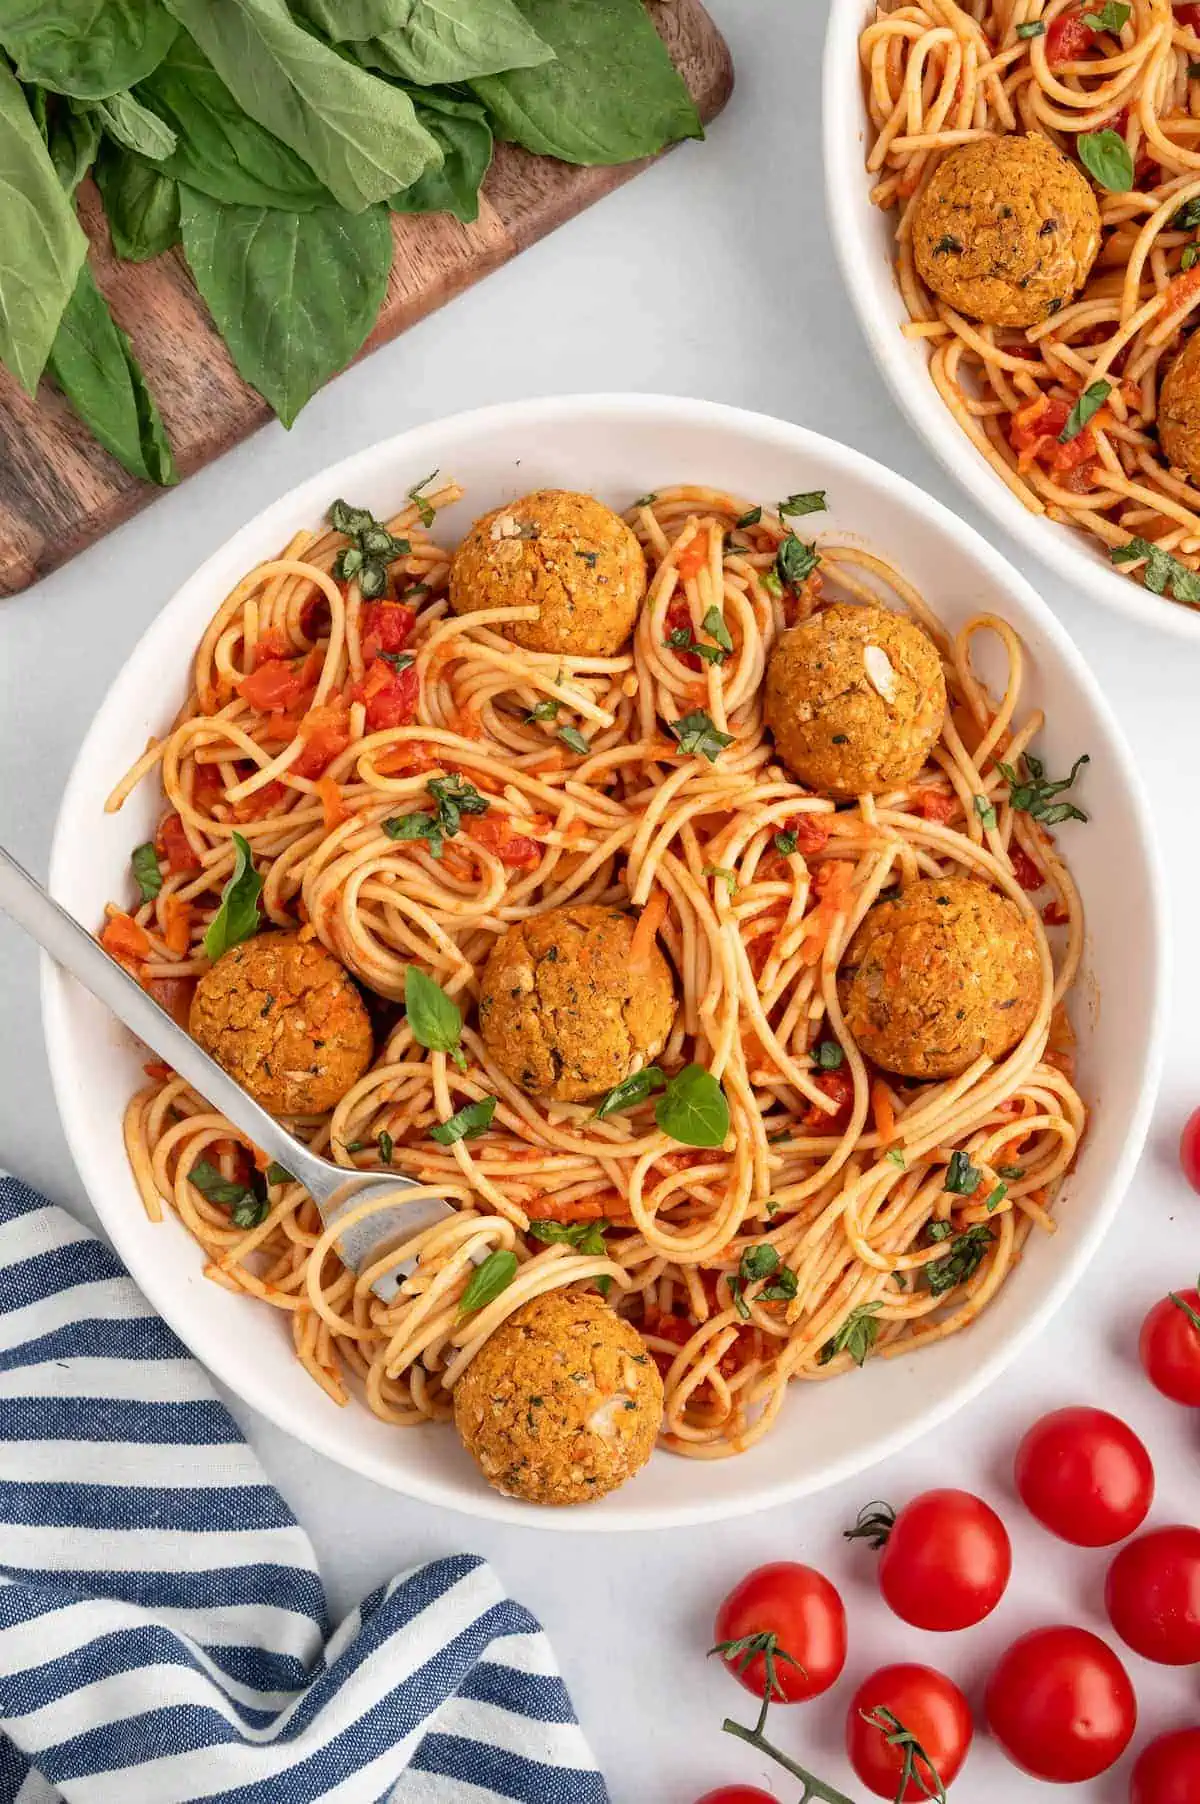 A bowl of pasta with sauce, veggie meatballs, and basil garnish with a fork.